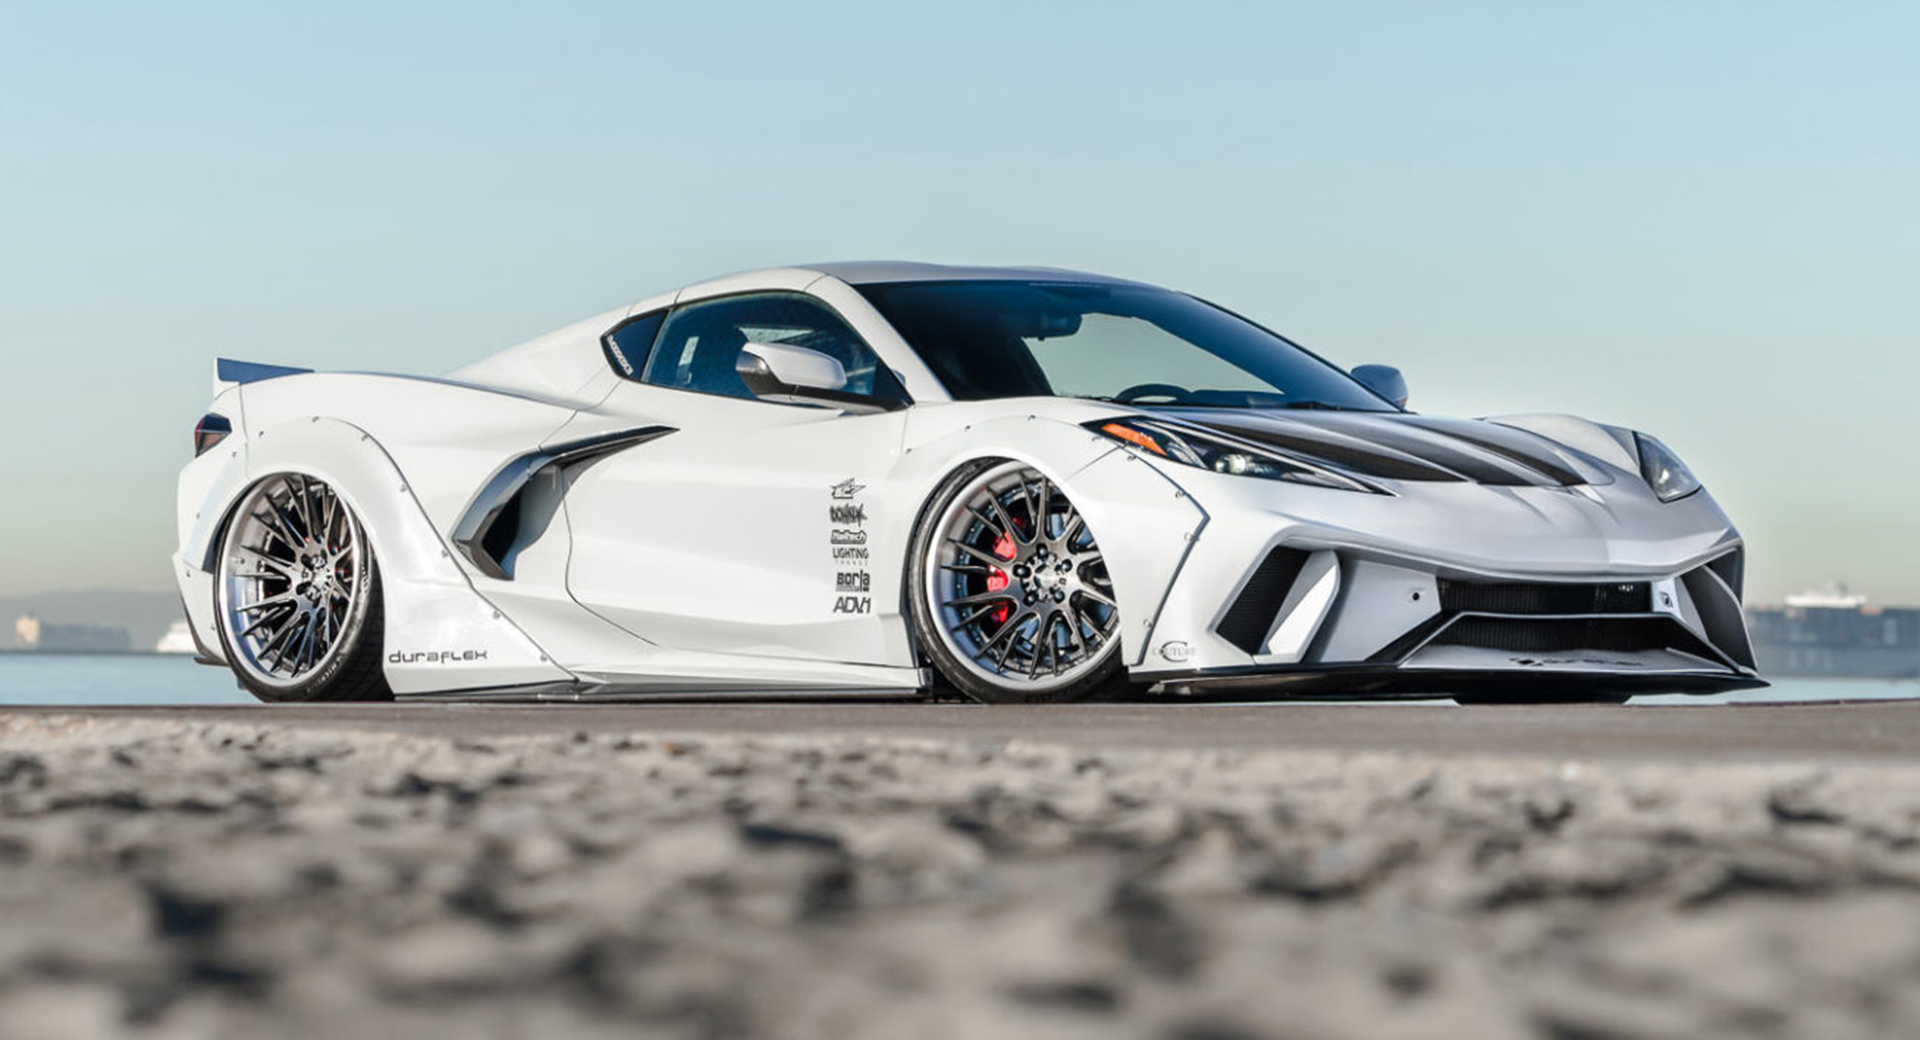 Widebody Kit And Wheels Come Together To Create A Crazy C8